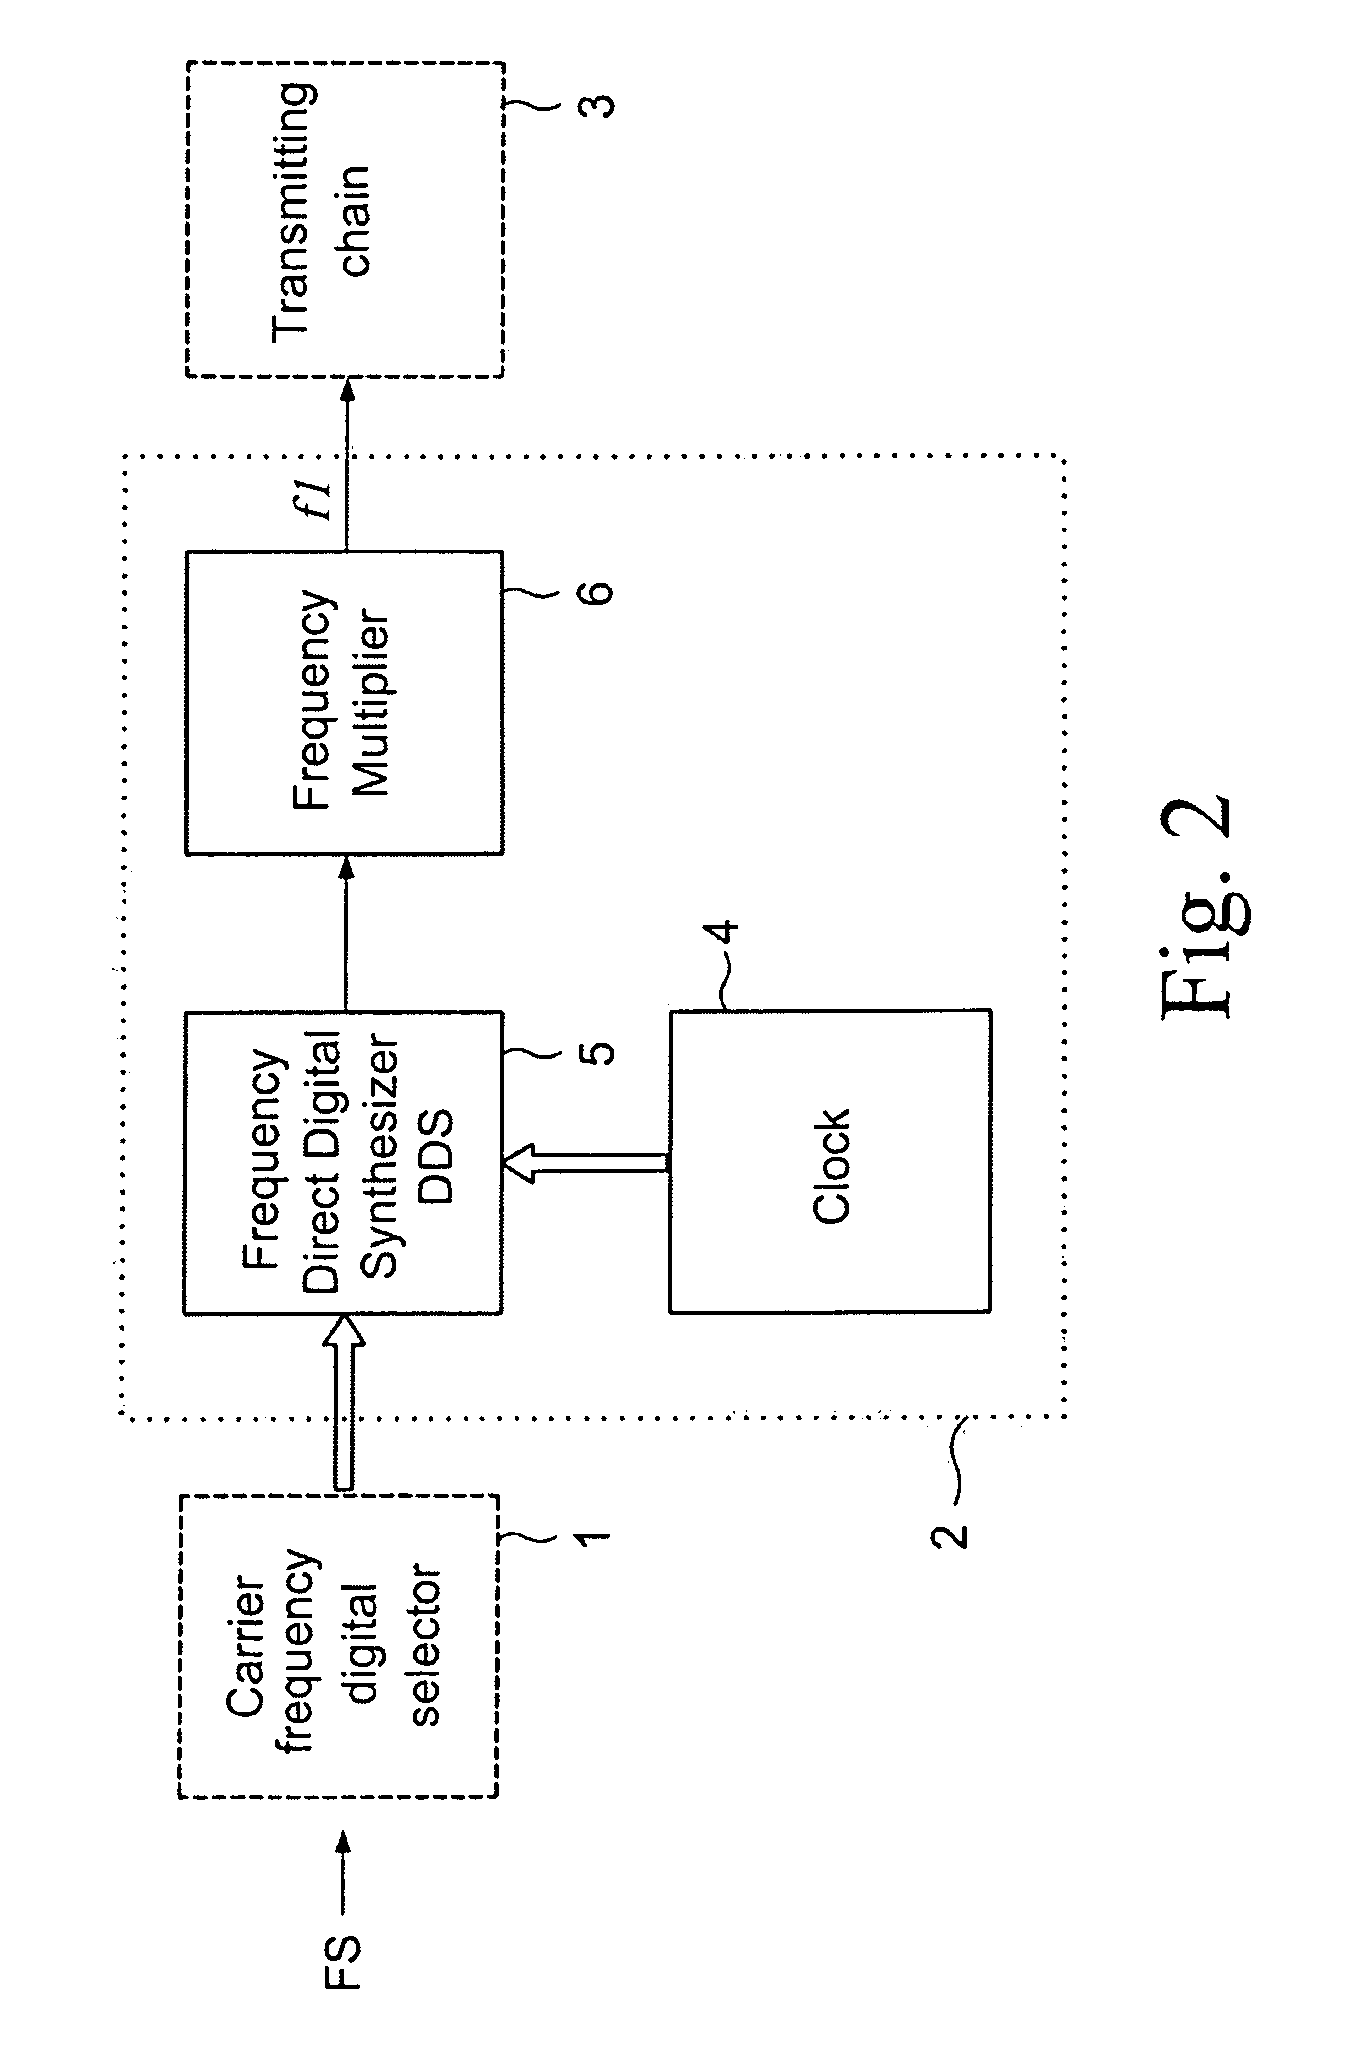 High-capacity location and identification system for cooperating mobiles with frequency agile and time division transponder device on board